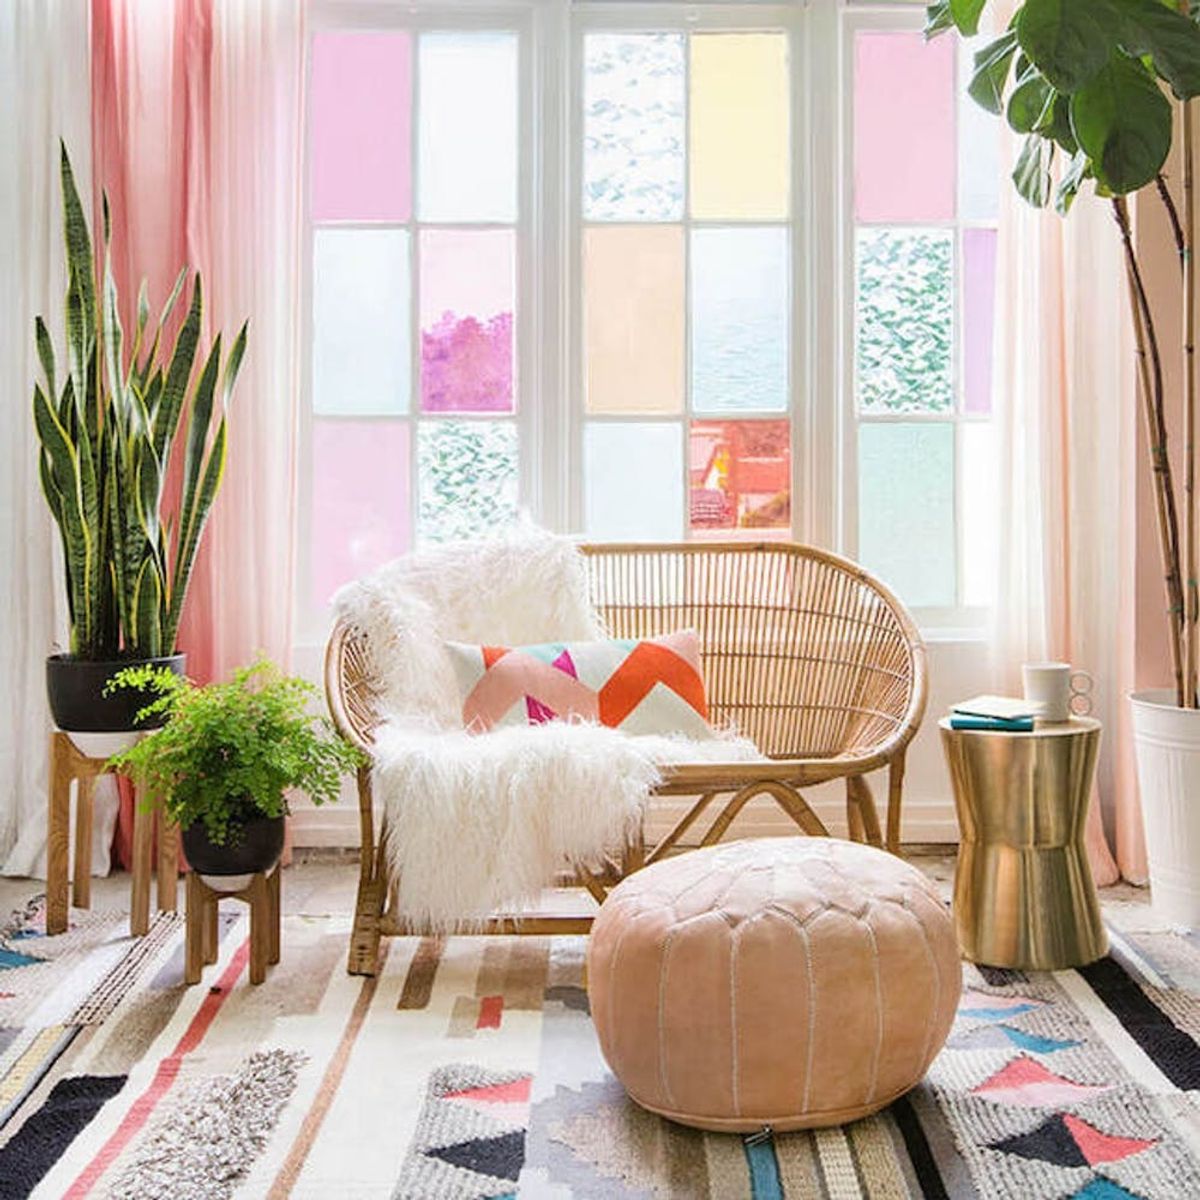 This Simple Home Decor Trick Will Instantly Make Your Home More Stylish